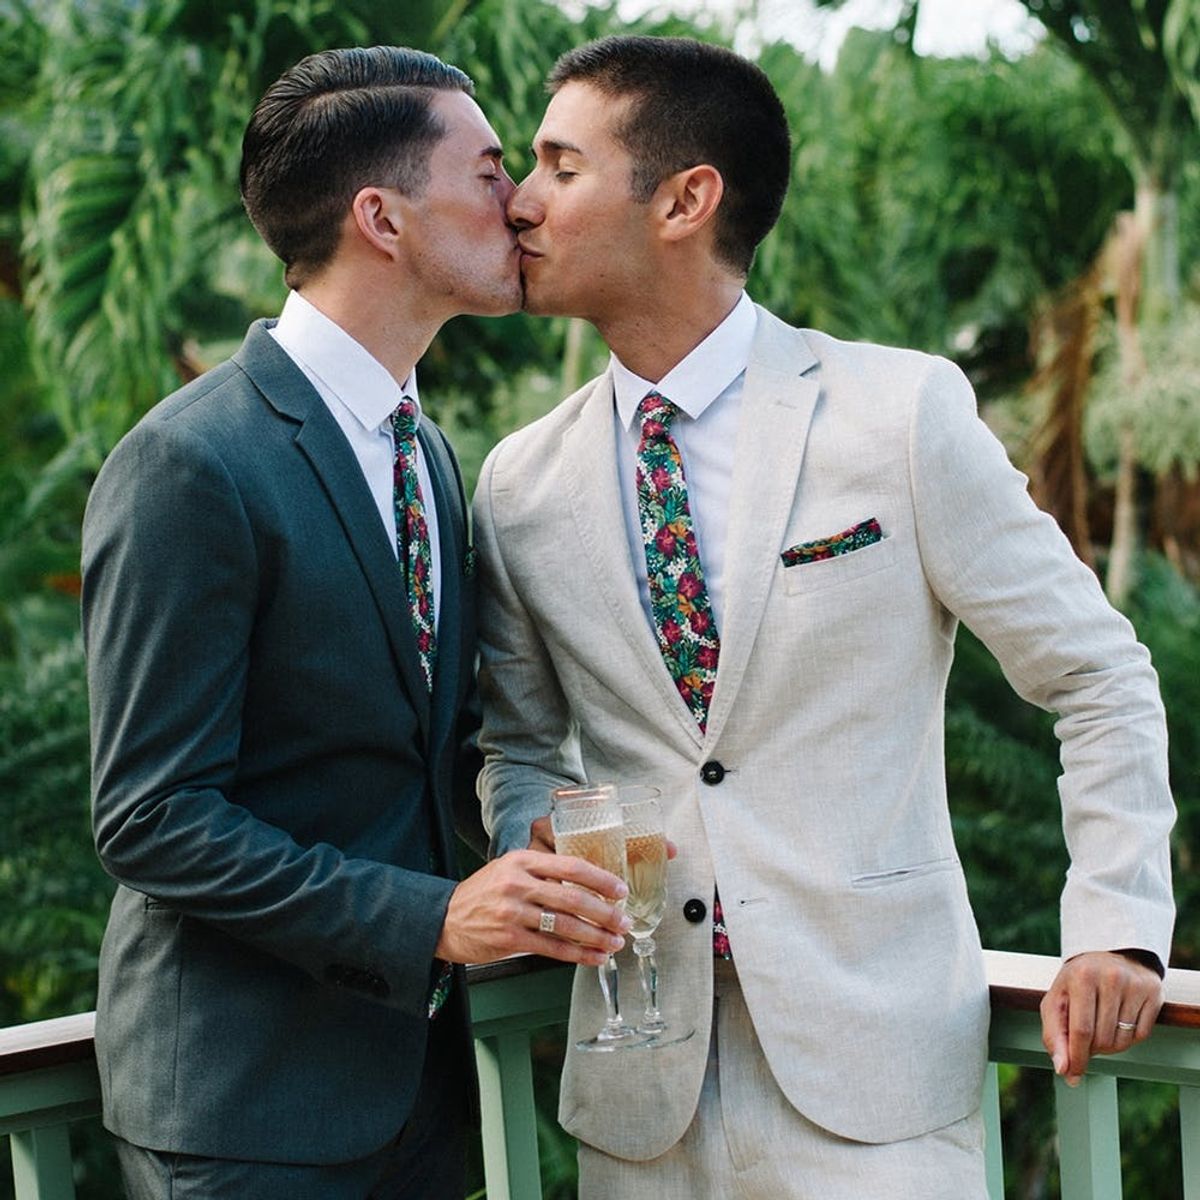 This Olympic Skater’s Wedding Is Beyond Adorable